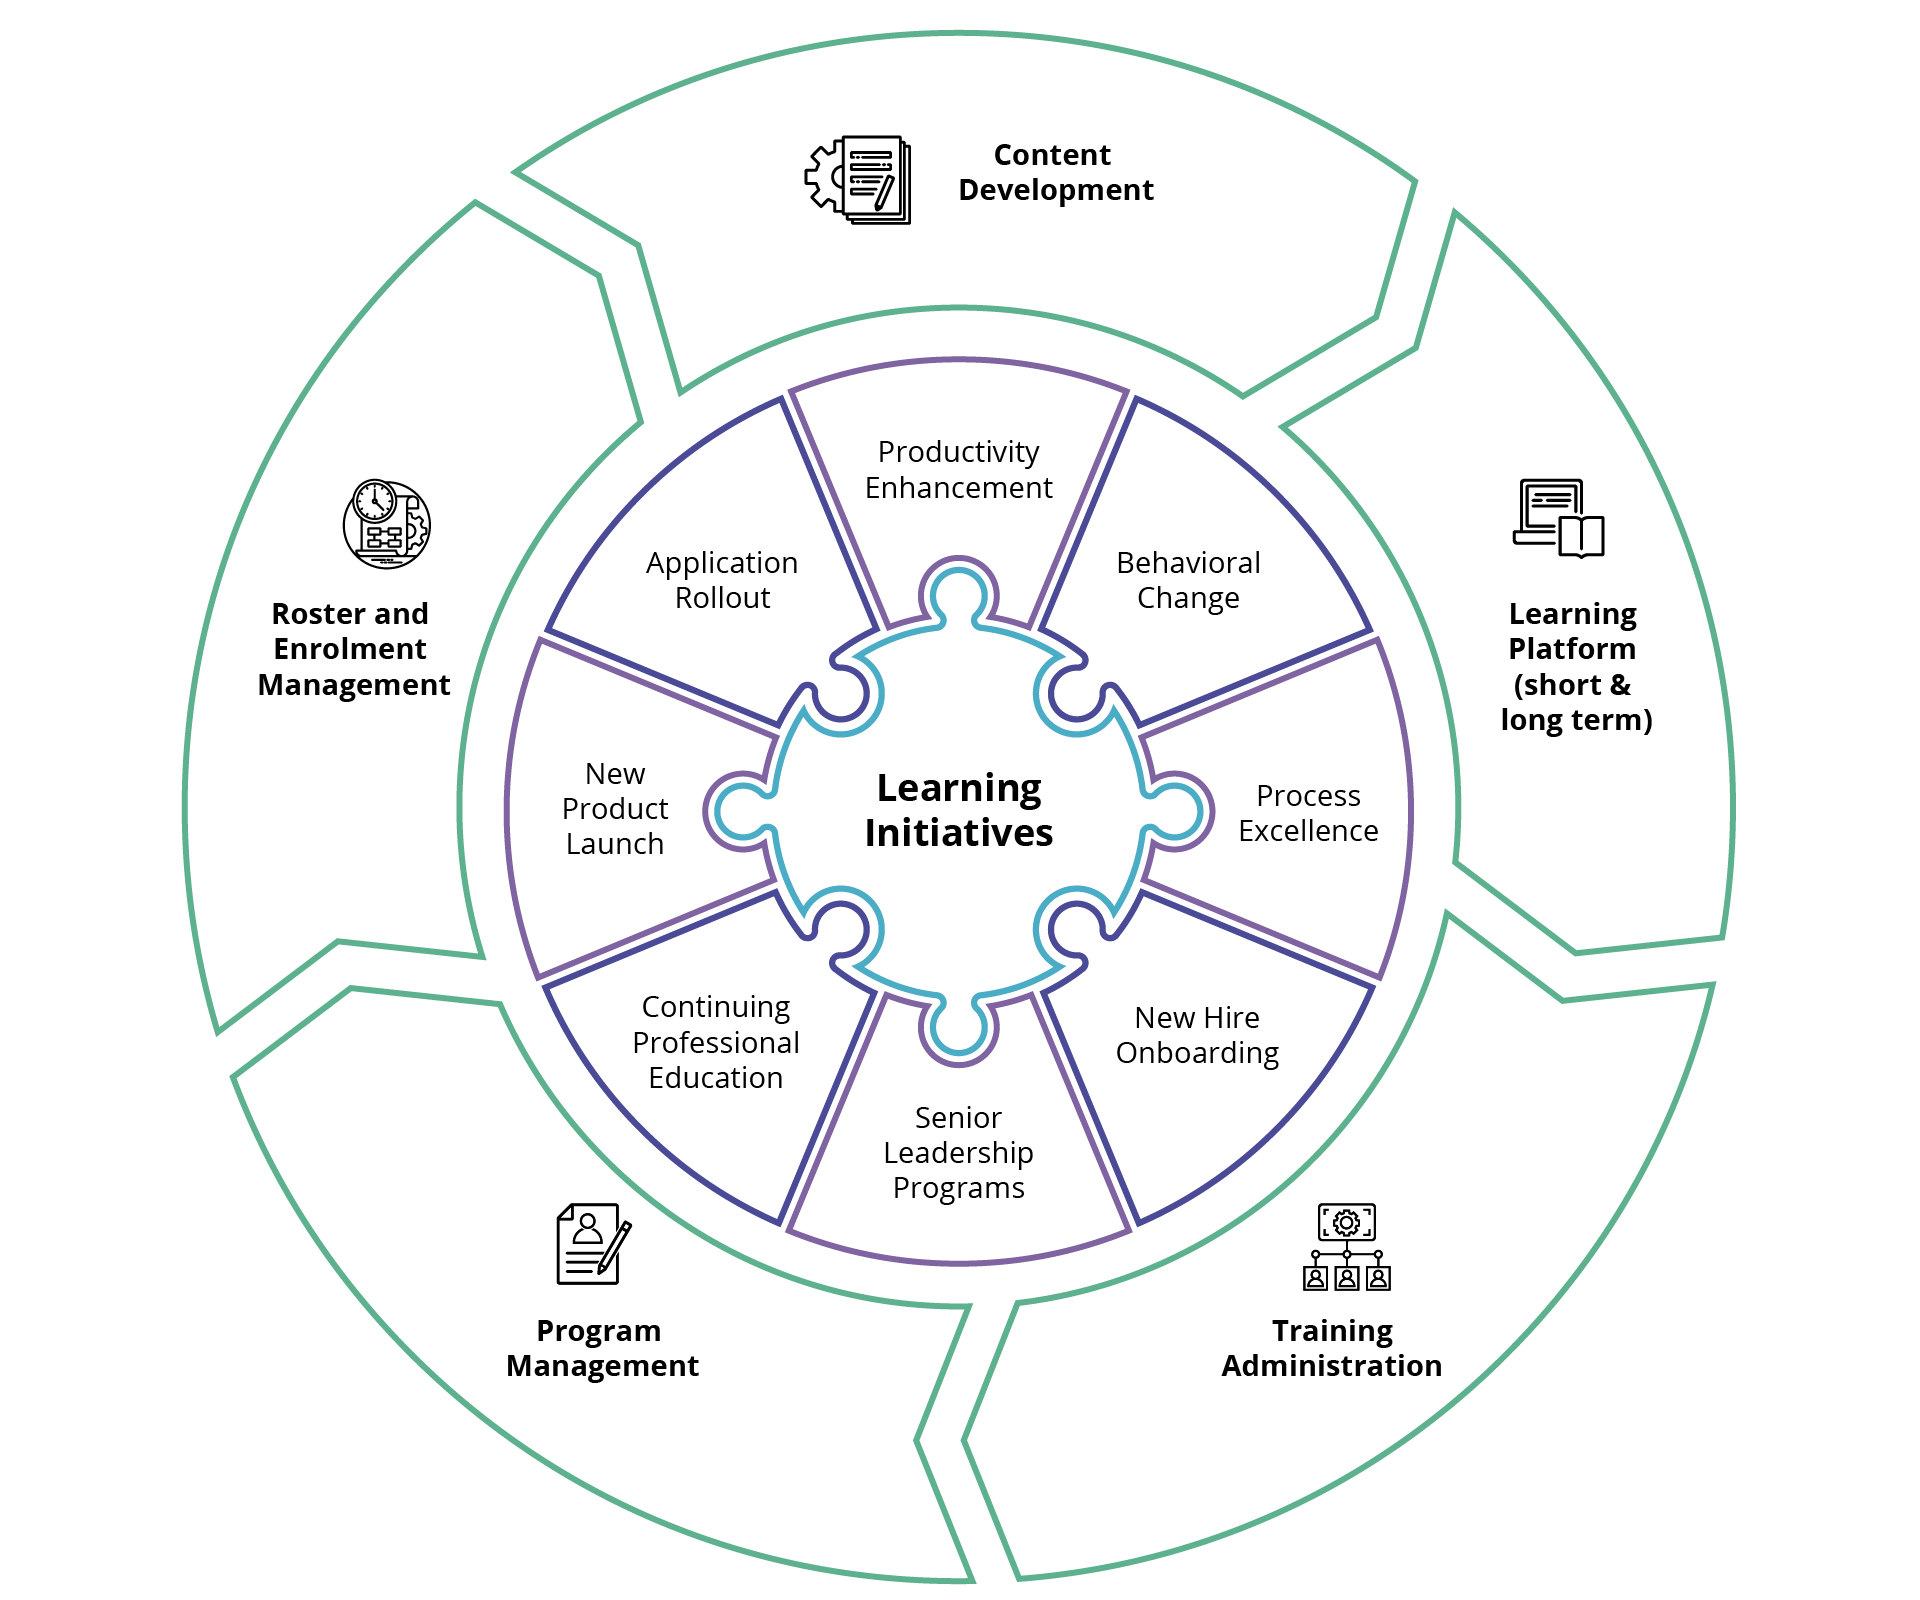 Diagram consisting of three concentric circles. The inner circle has edges like a puzzle piece; text reads Learning Initiatives. The middle circle is split into 8 segments labelled Productivity Enhancement, Behavioral Change, Process Excellence, New Hir Onboarding, Senior Leadership Programs, Continuing Professional Education, New Product Launch, and Application Rollout. The outer circle comprises five interlocking arrows labeled Content Development, Learning Platform (short and long term), Training Administration, Program Management, and Roster and Enrolment Management